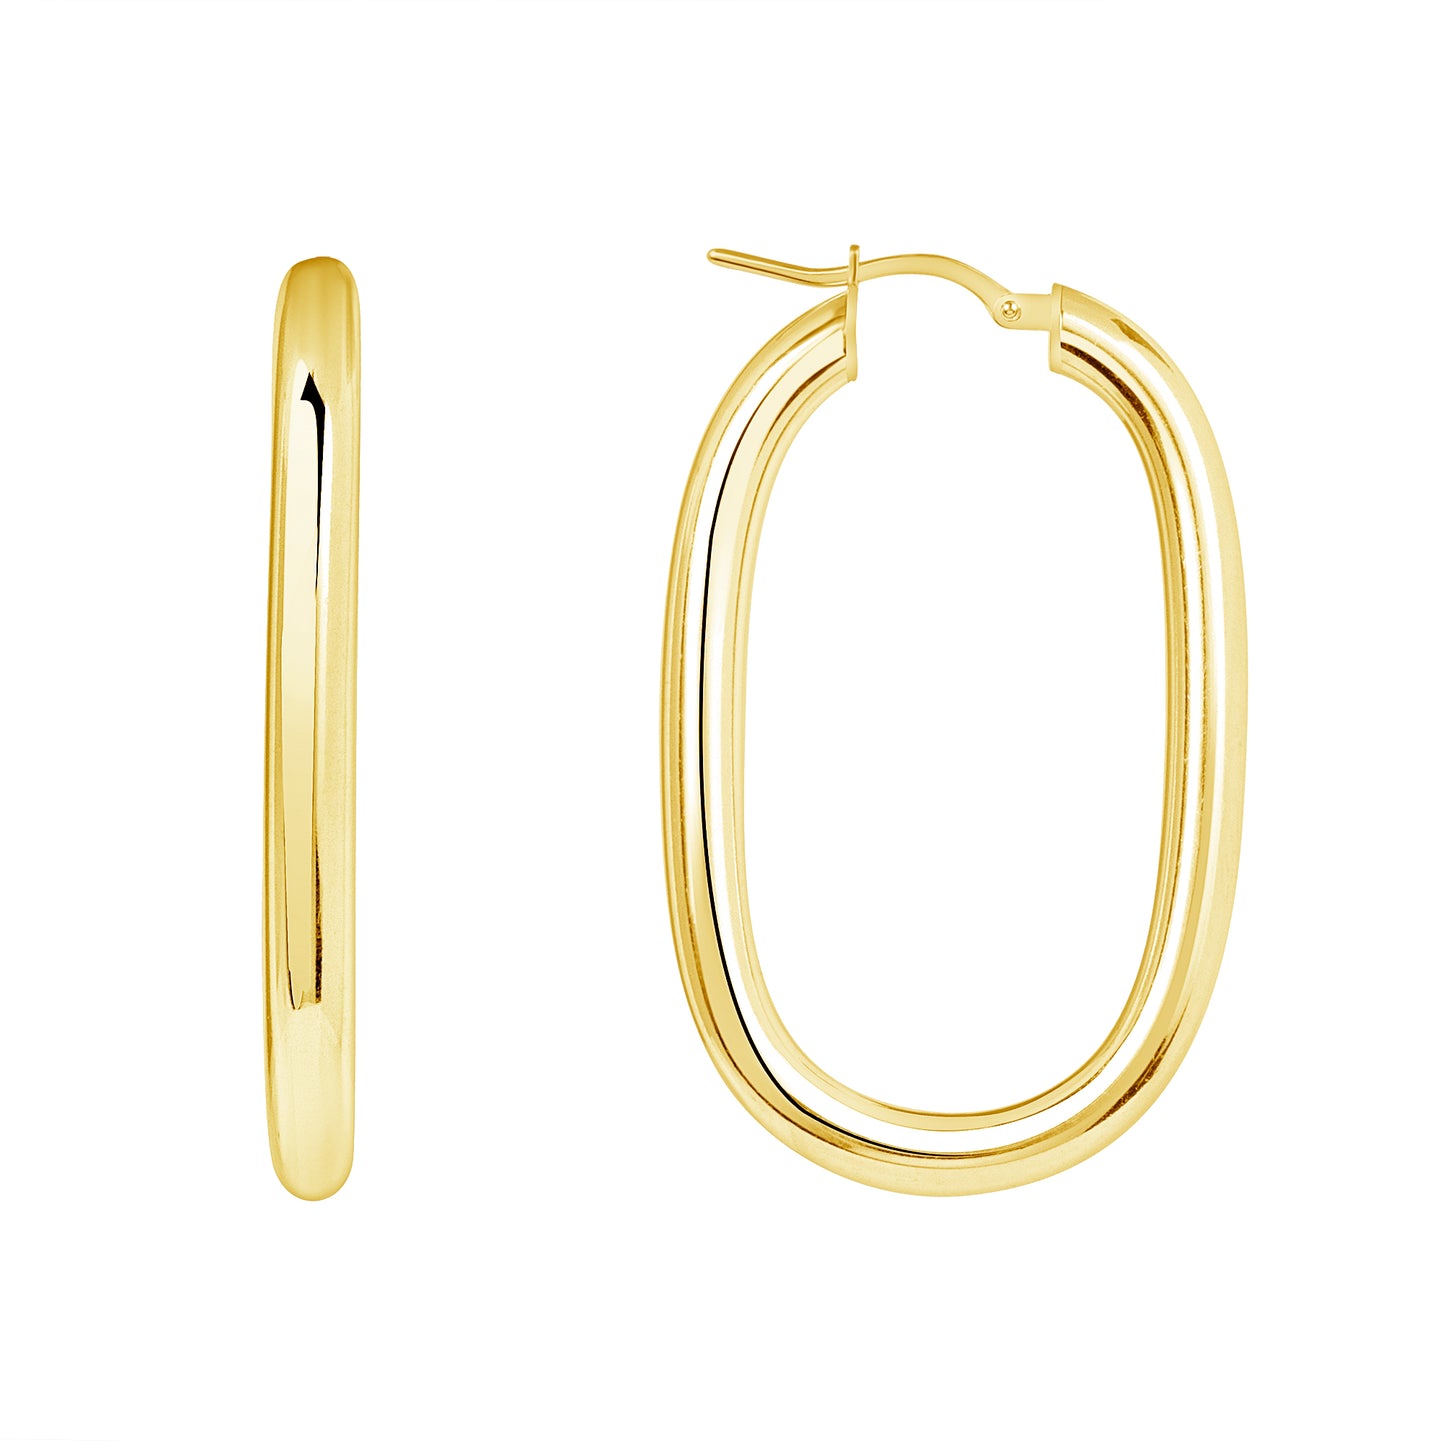 Silver 925 Gold Plated Italian Silver Square Oval Hoop Earring. ITHP154-25MG